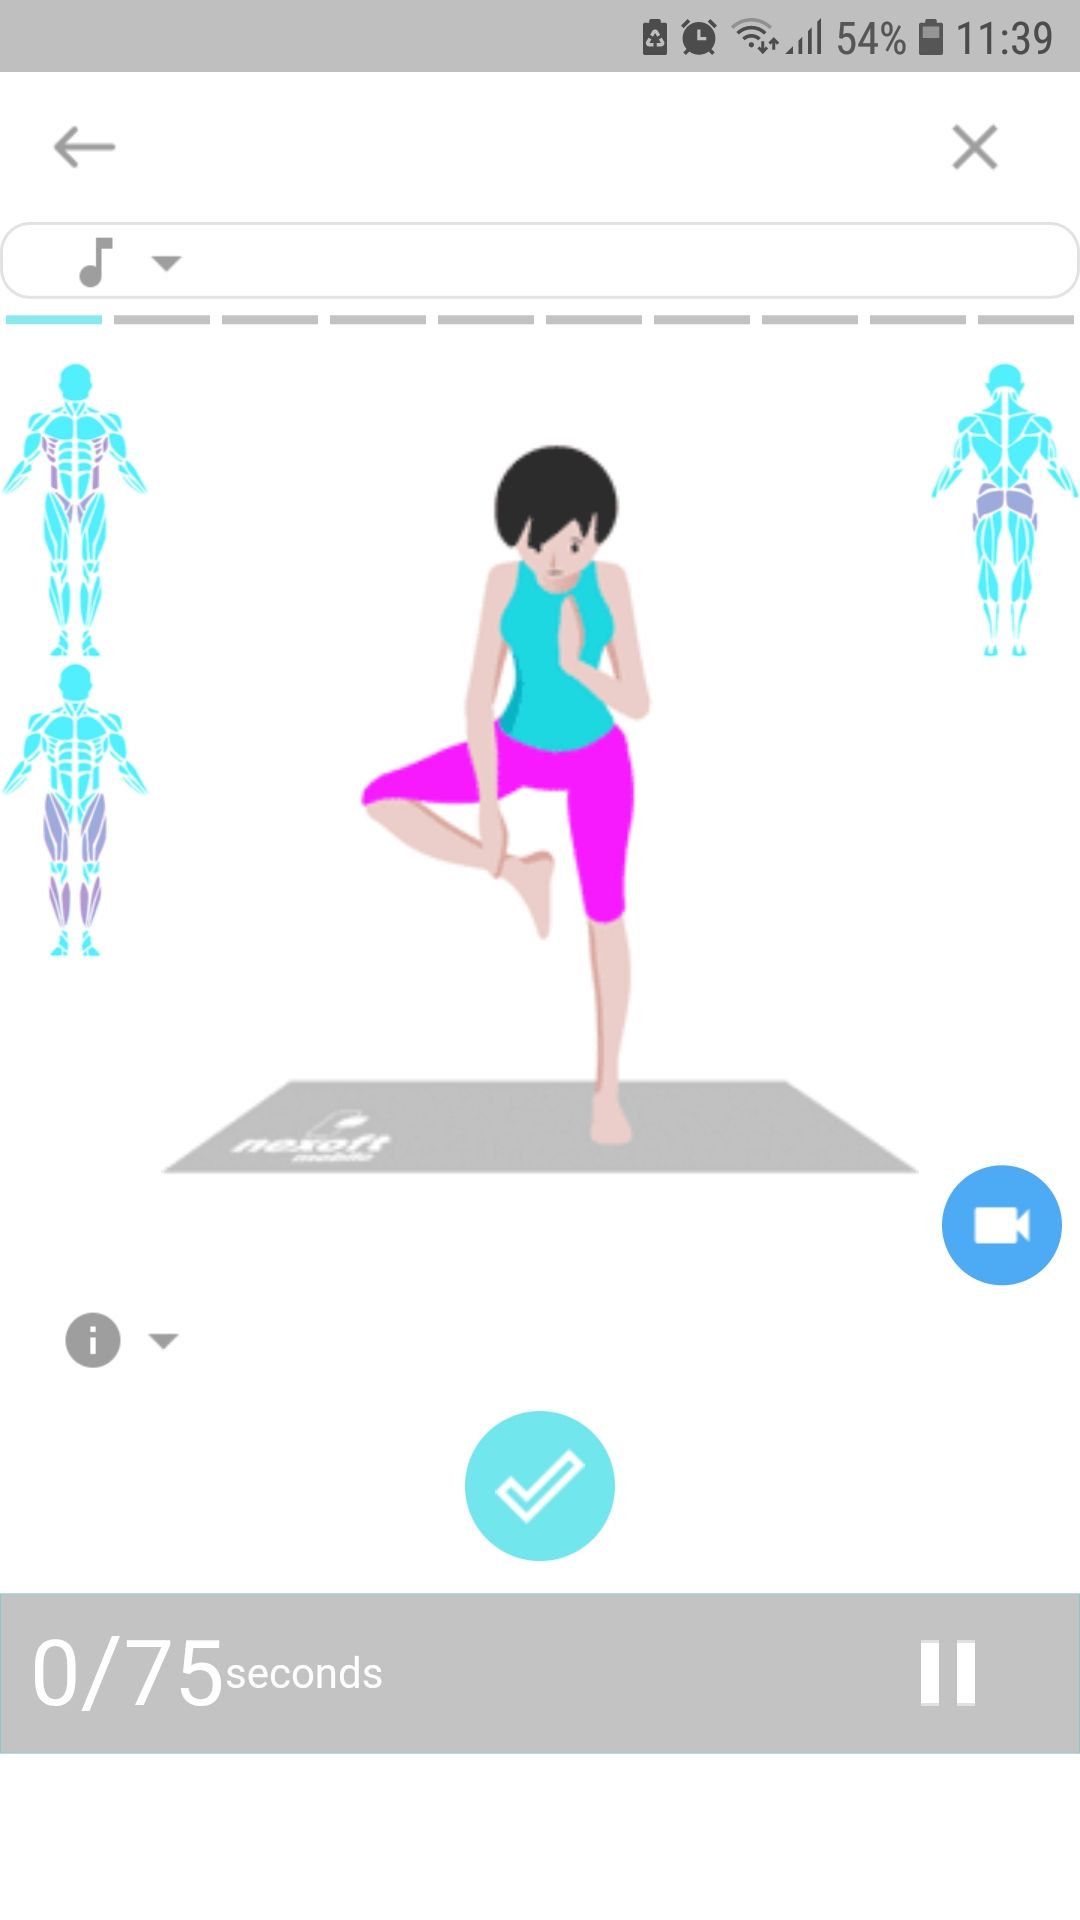 Easy Yoga for weight loss home mobile fitness app workout